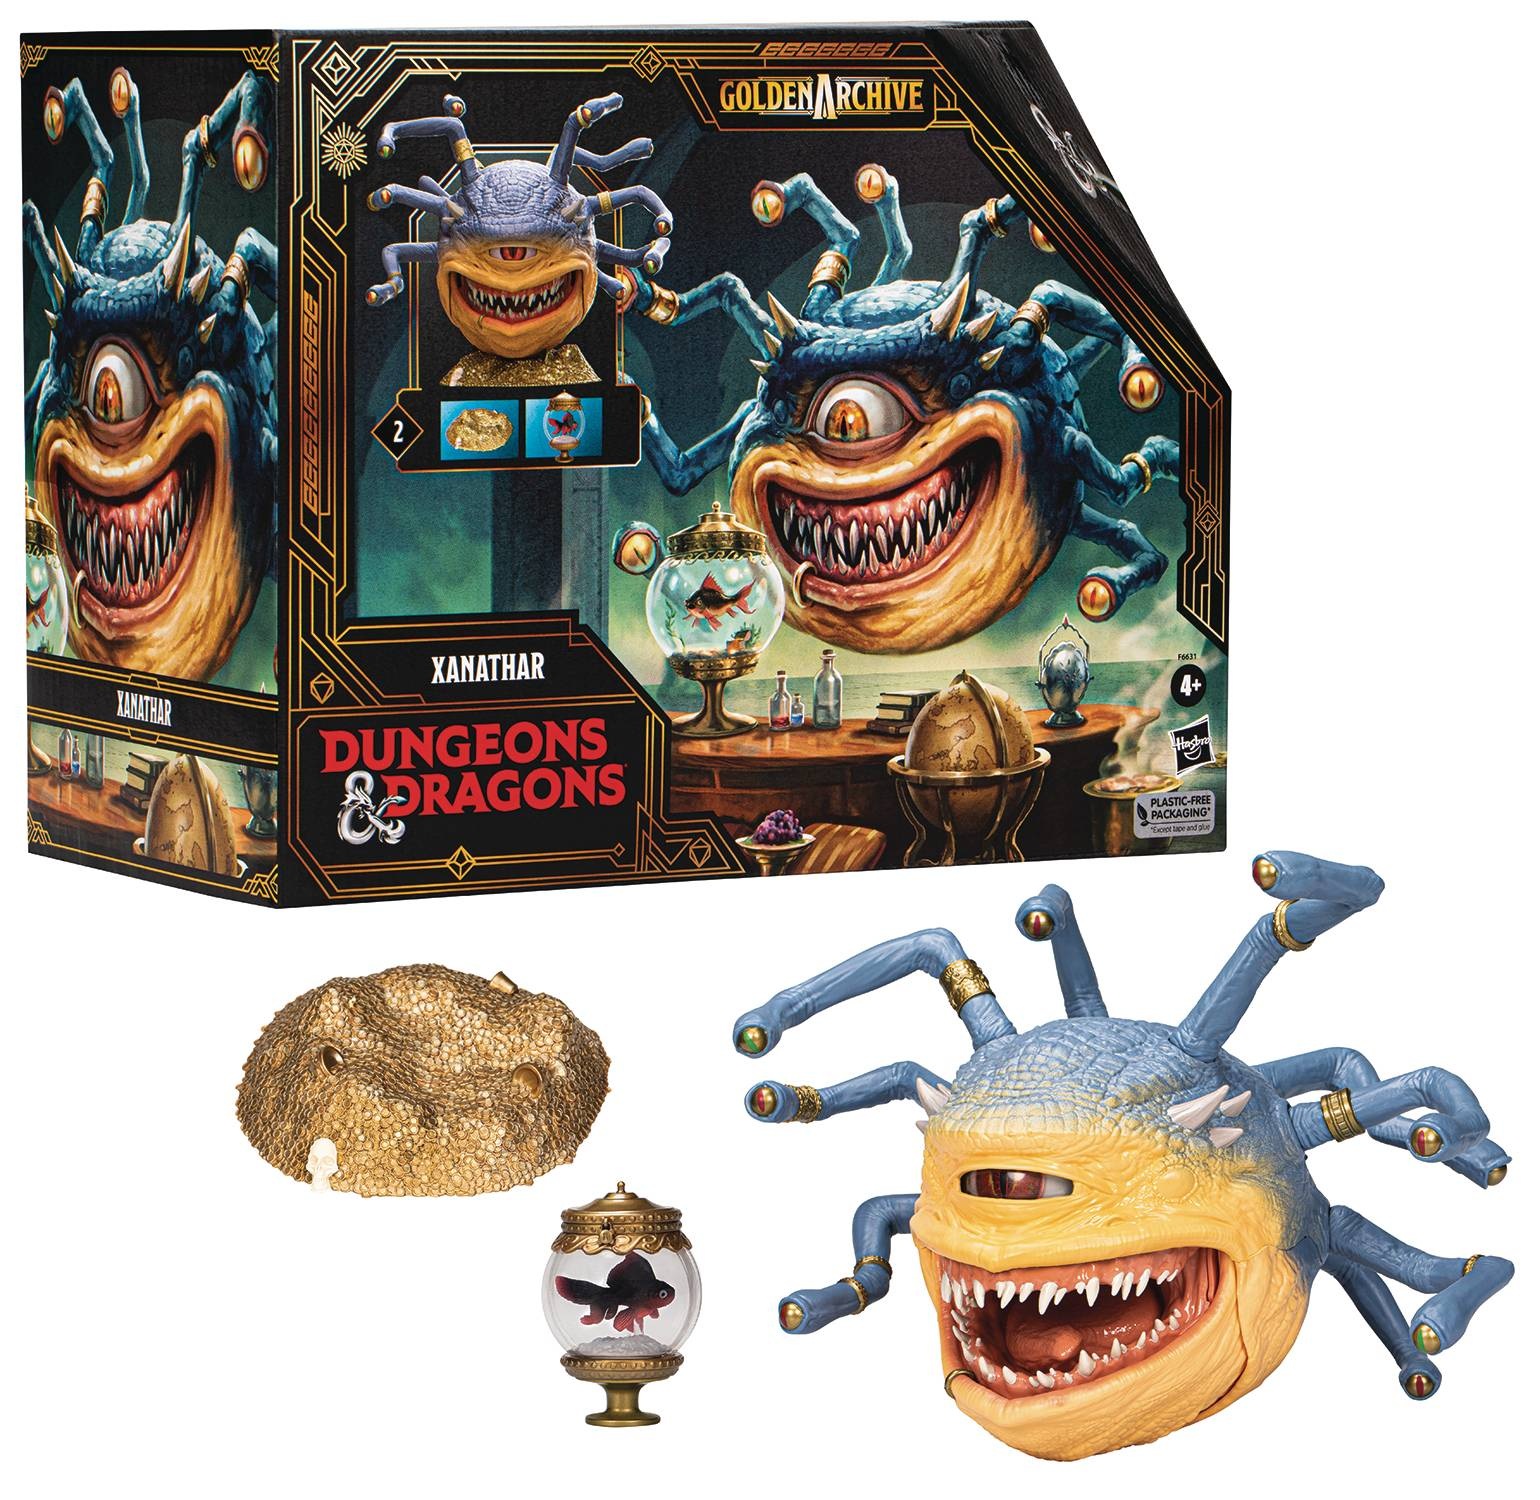 Dungeons & Dragons Golden Archive Xanathar 6-Inch Scale Action Figure Case